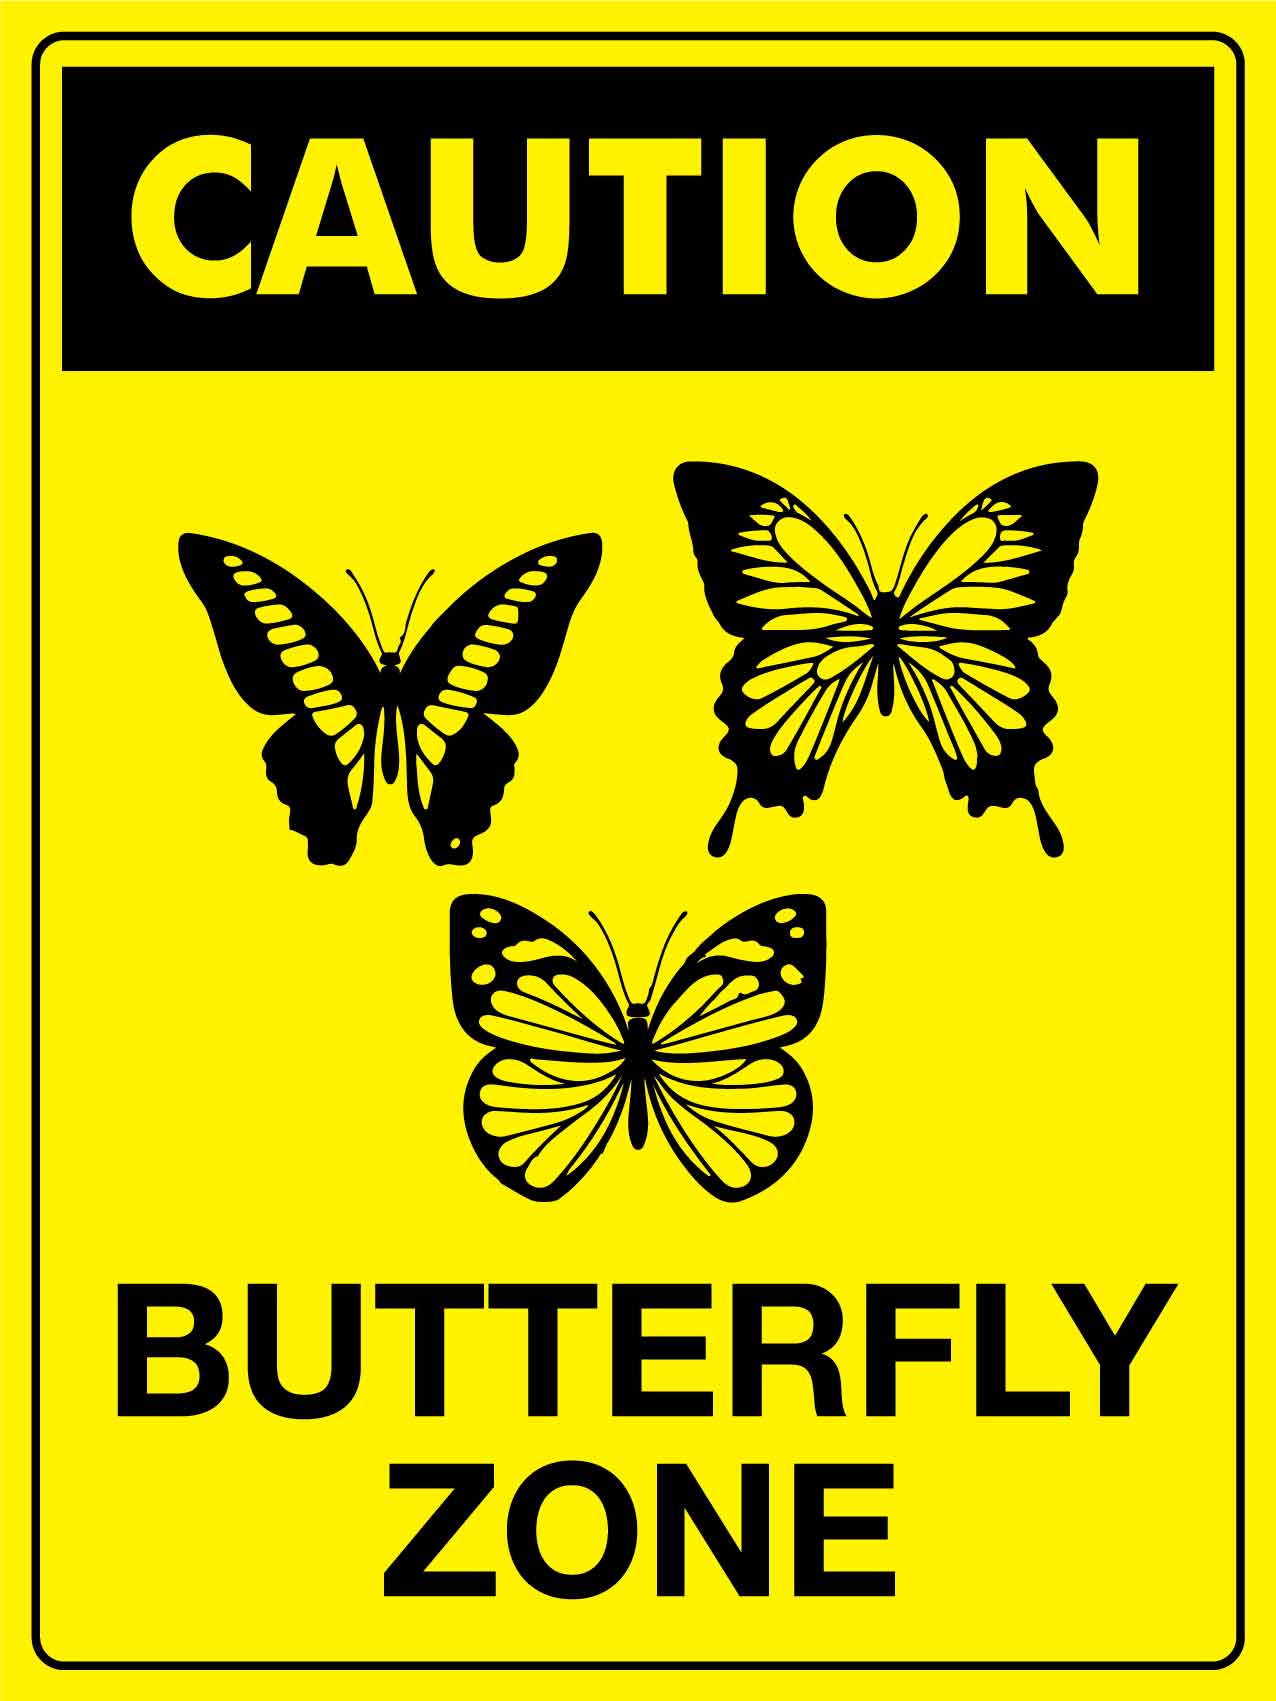 Caution Butterfly Zone Sign